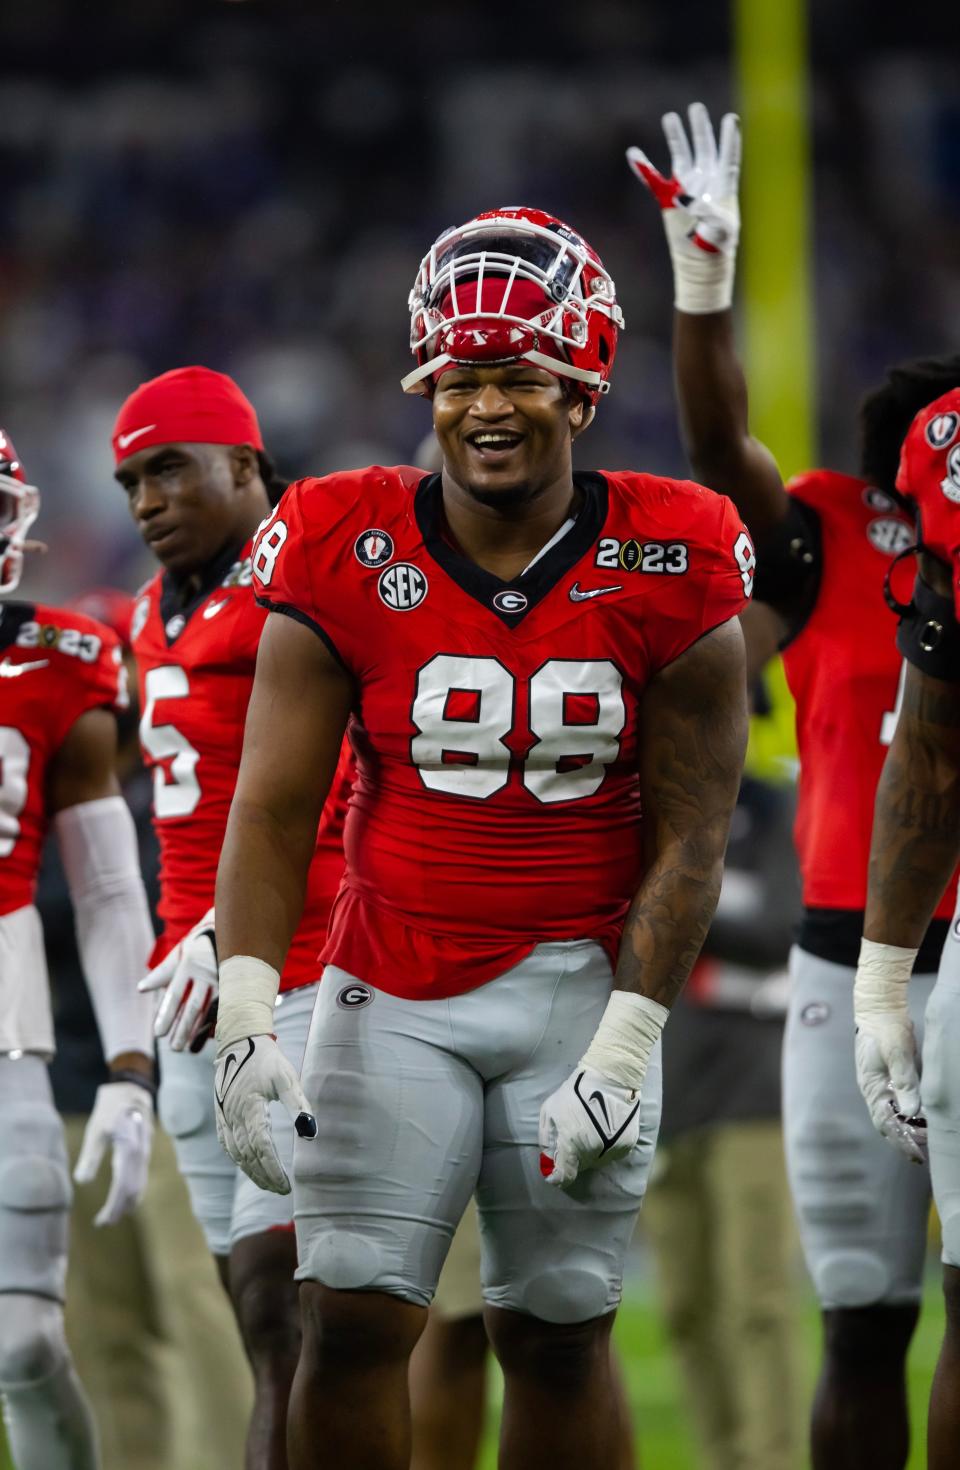 Georgia defensive lineman Jalen Carter (88) helped the Bulldogs beat the TCU Horned Frogs in the CFP national championship game.